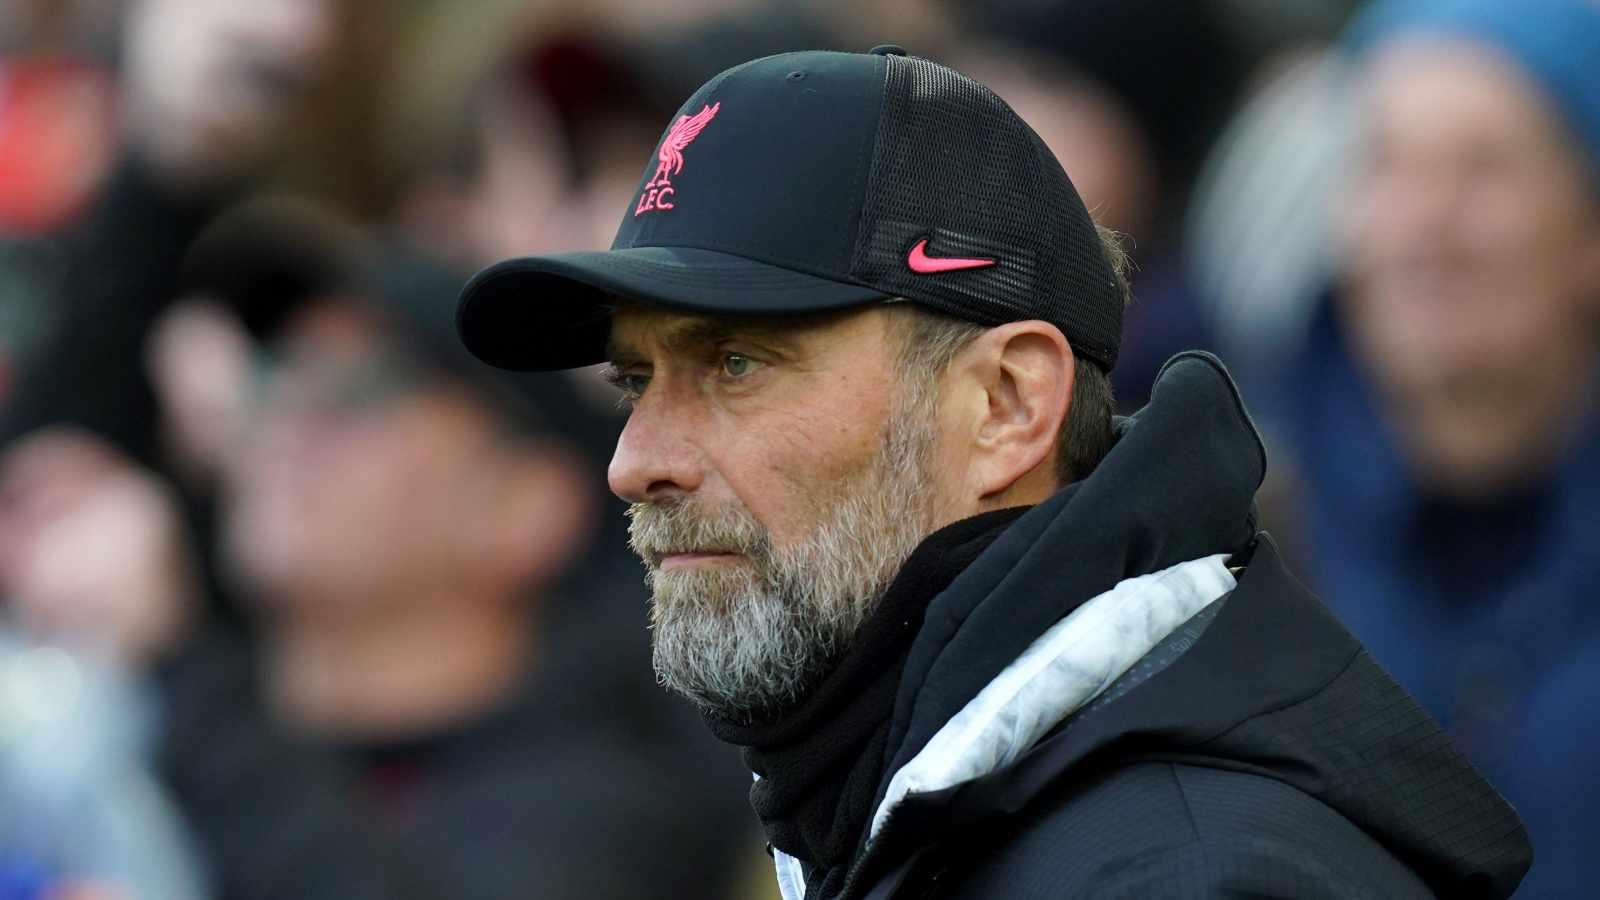 Crystal Palace vs Liverpool: We’ll correct our mistakes — Klopp